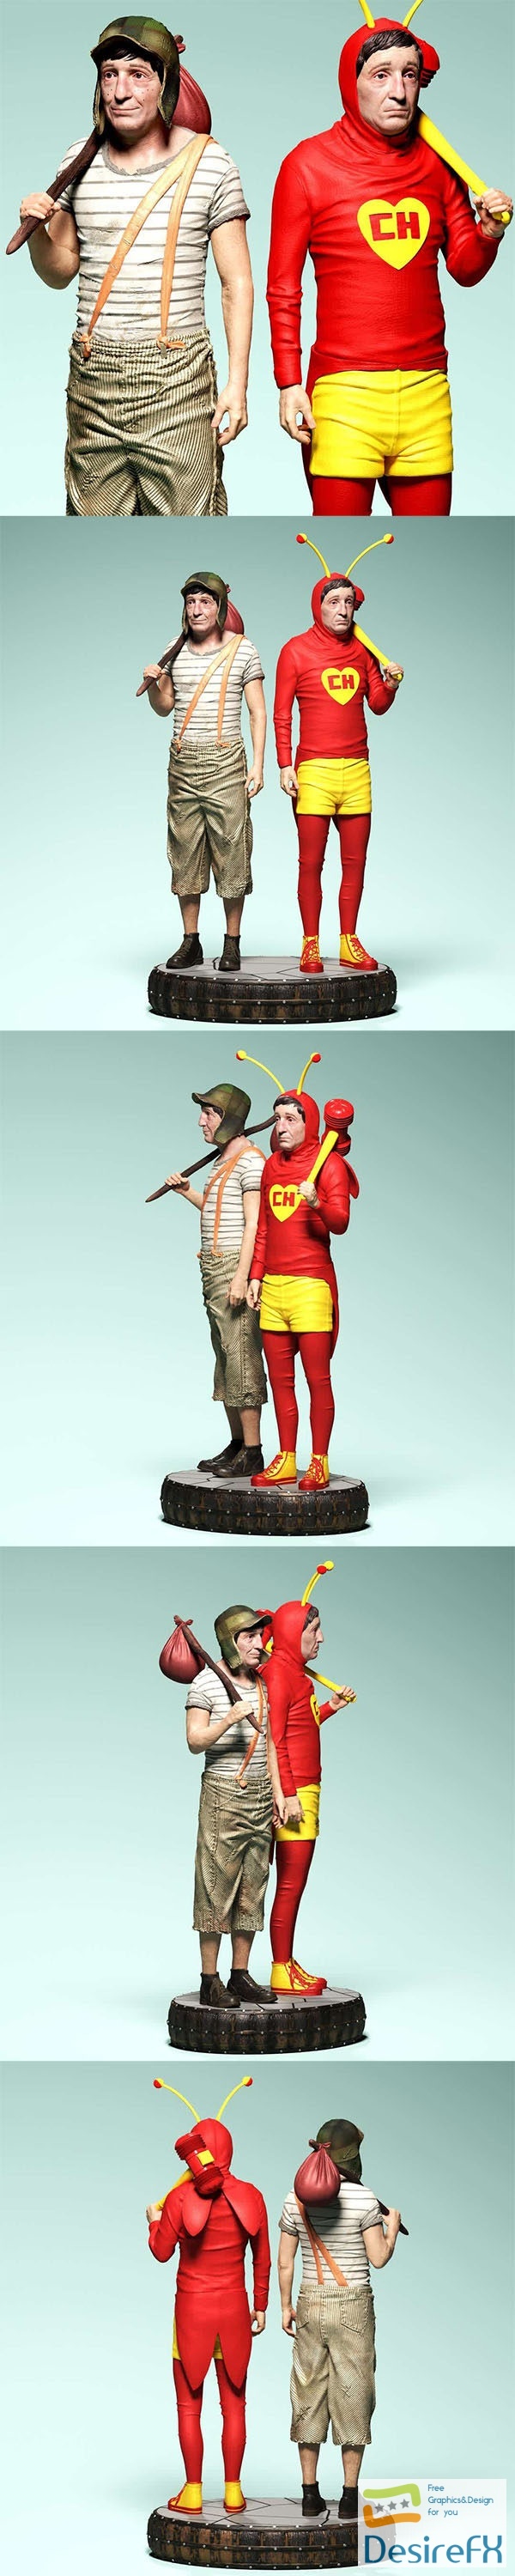 Chaves - Chapolin - 3D Print